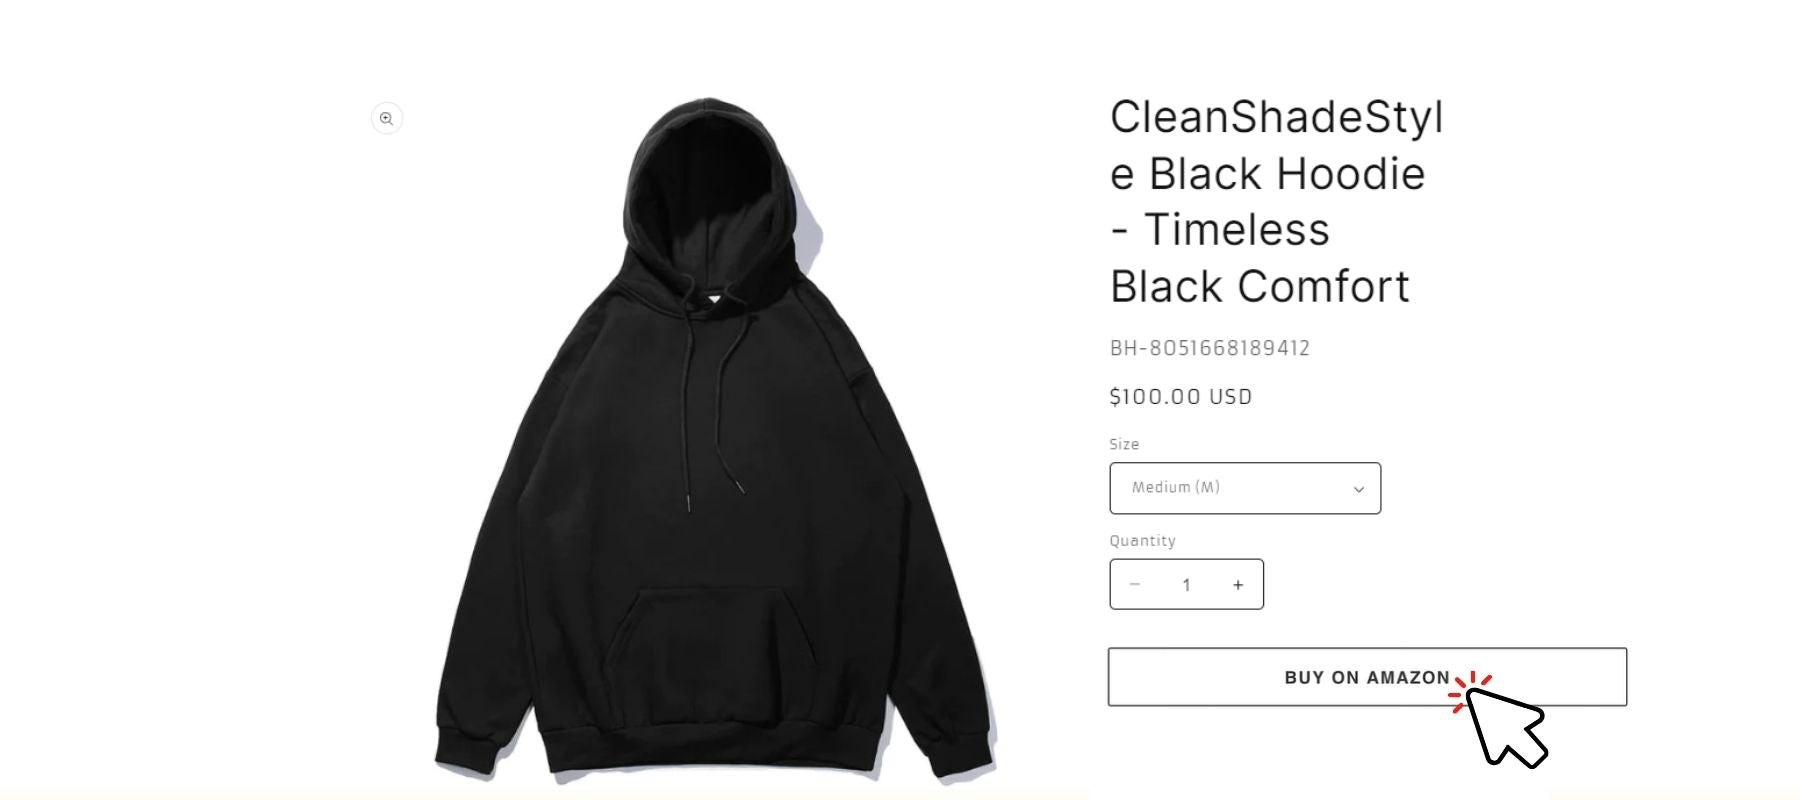 Replace Shopify's Add To Cart Button With An Affiliate Link